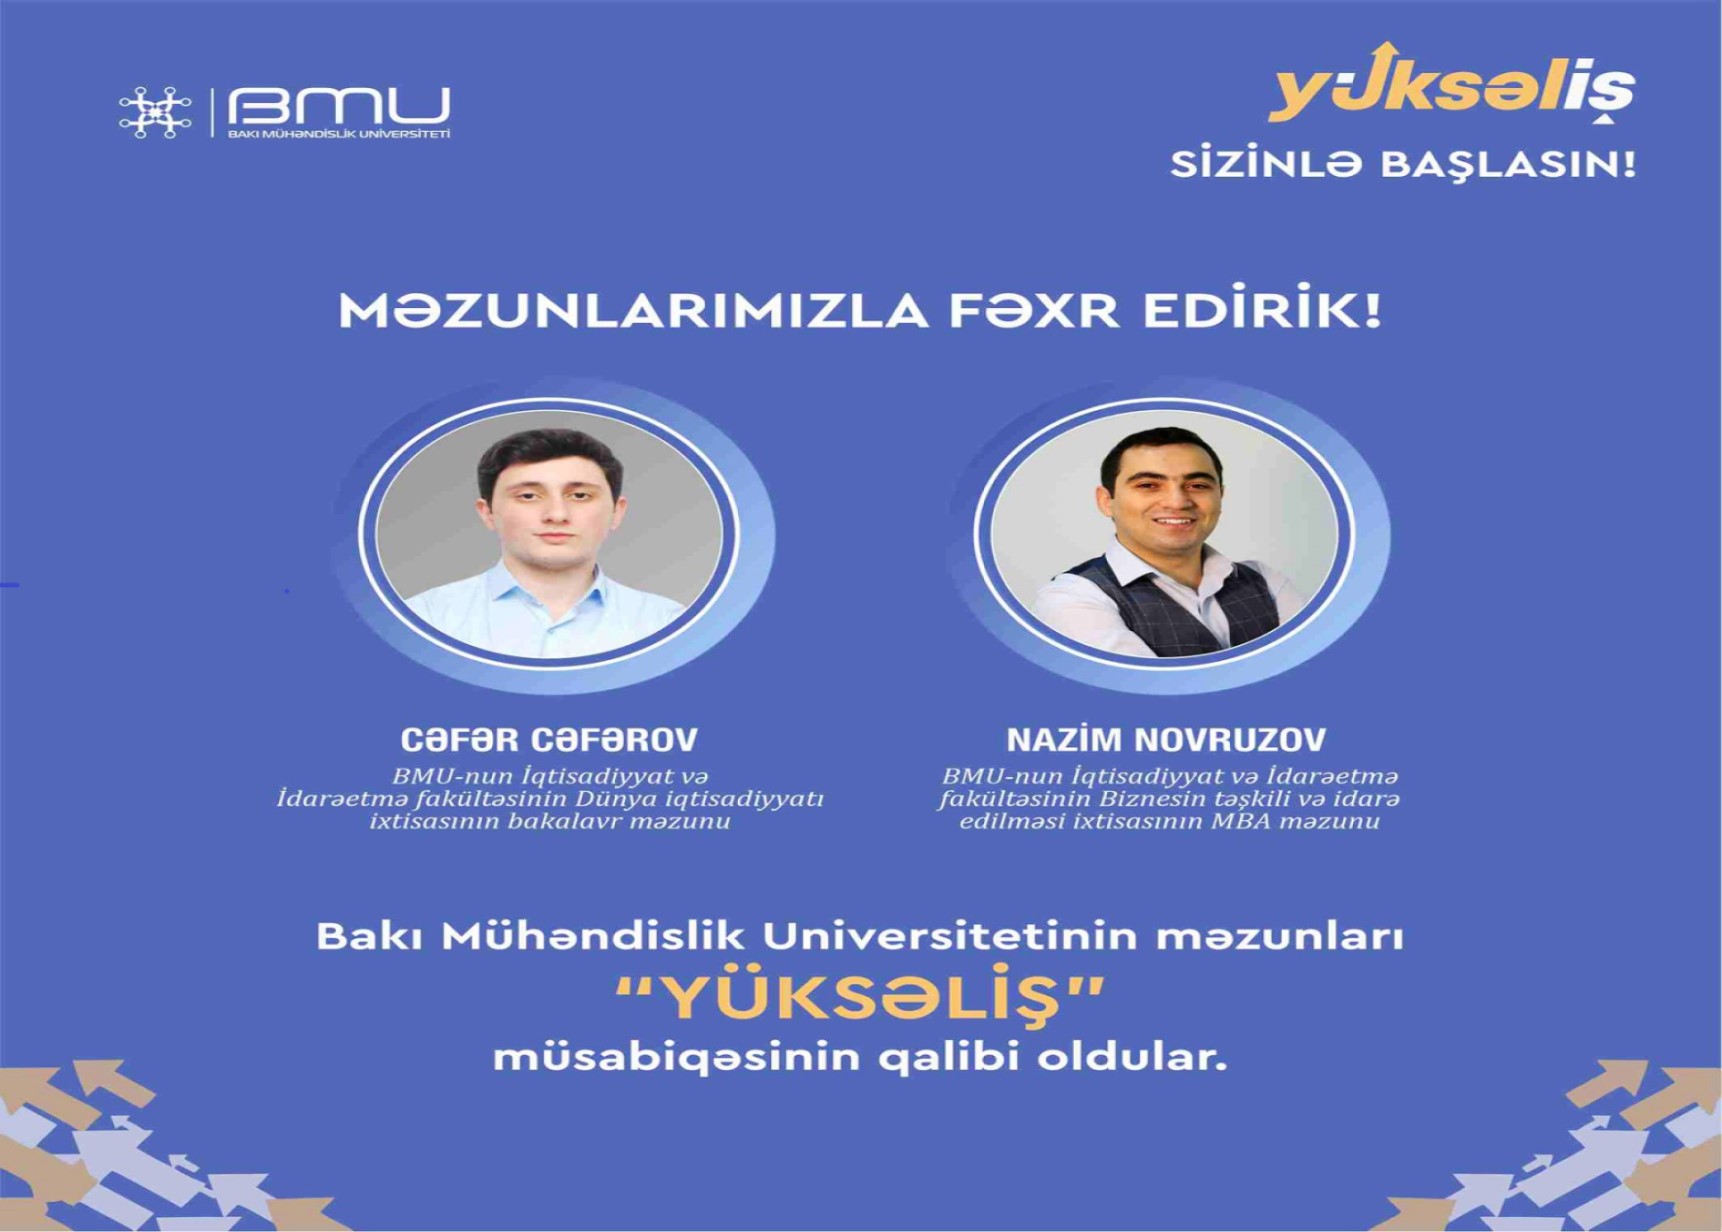 BEU graduates become the winners of "Yukselish"(Rise) competition